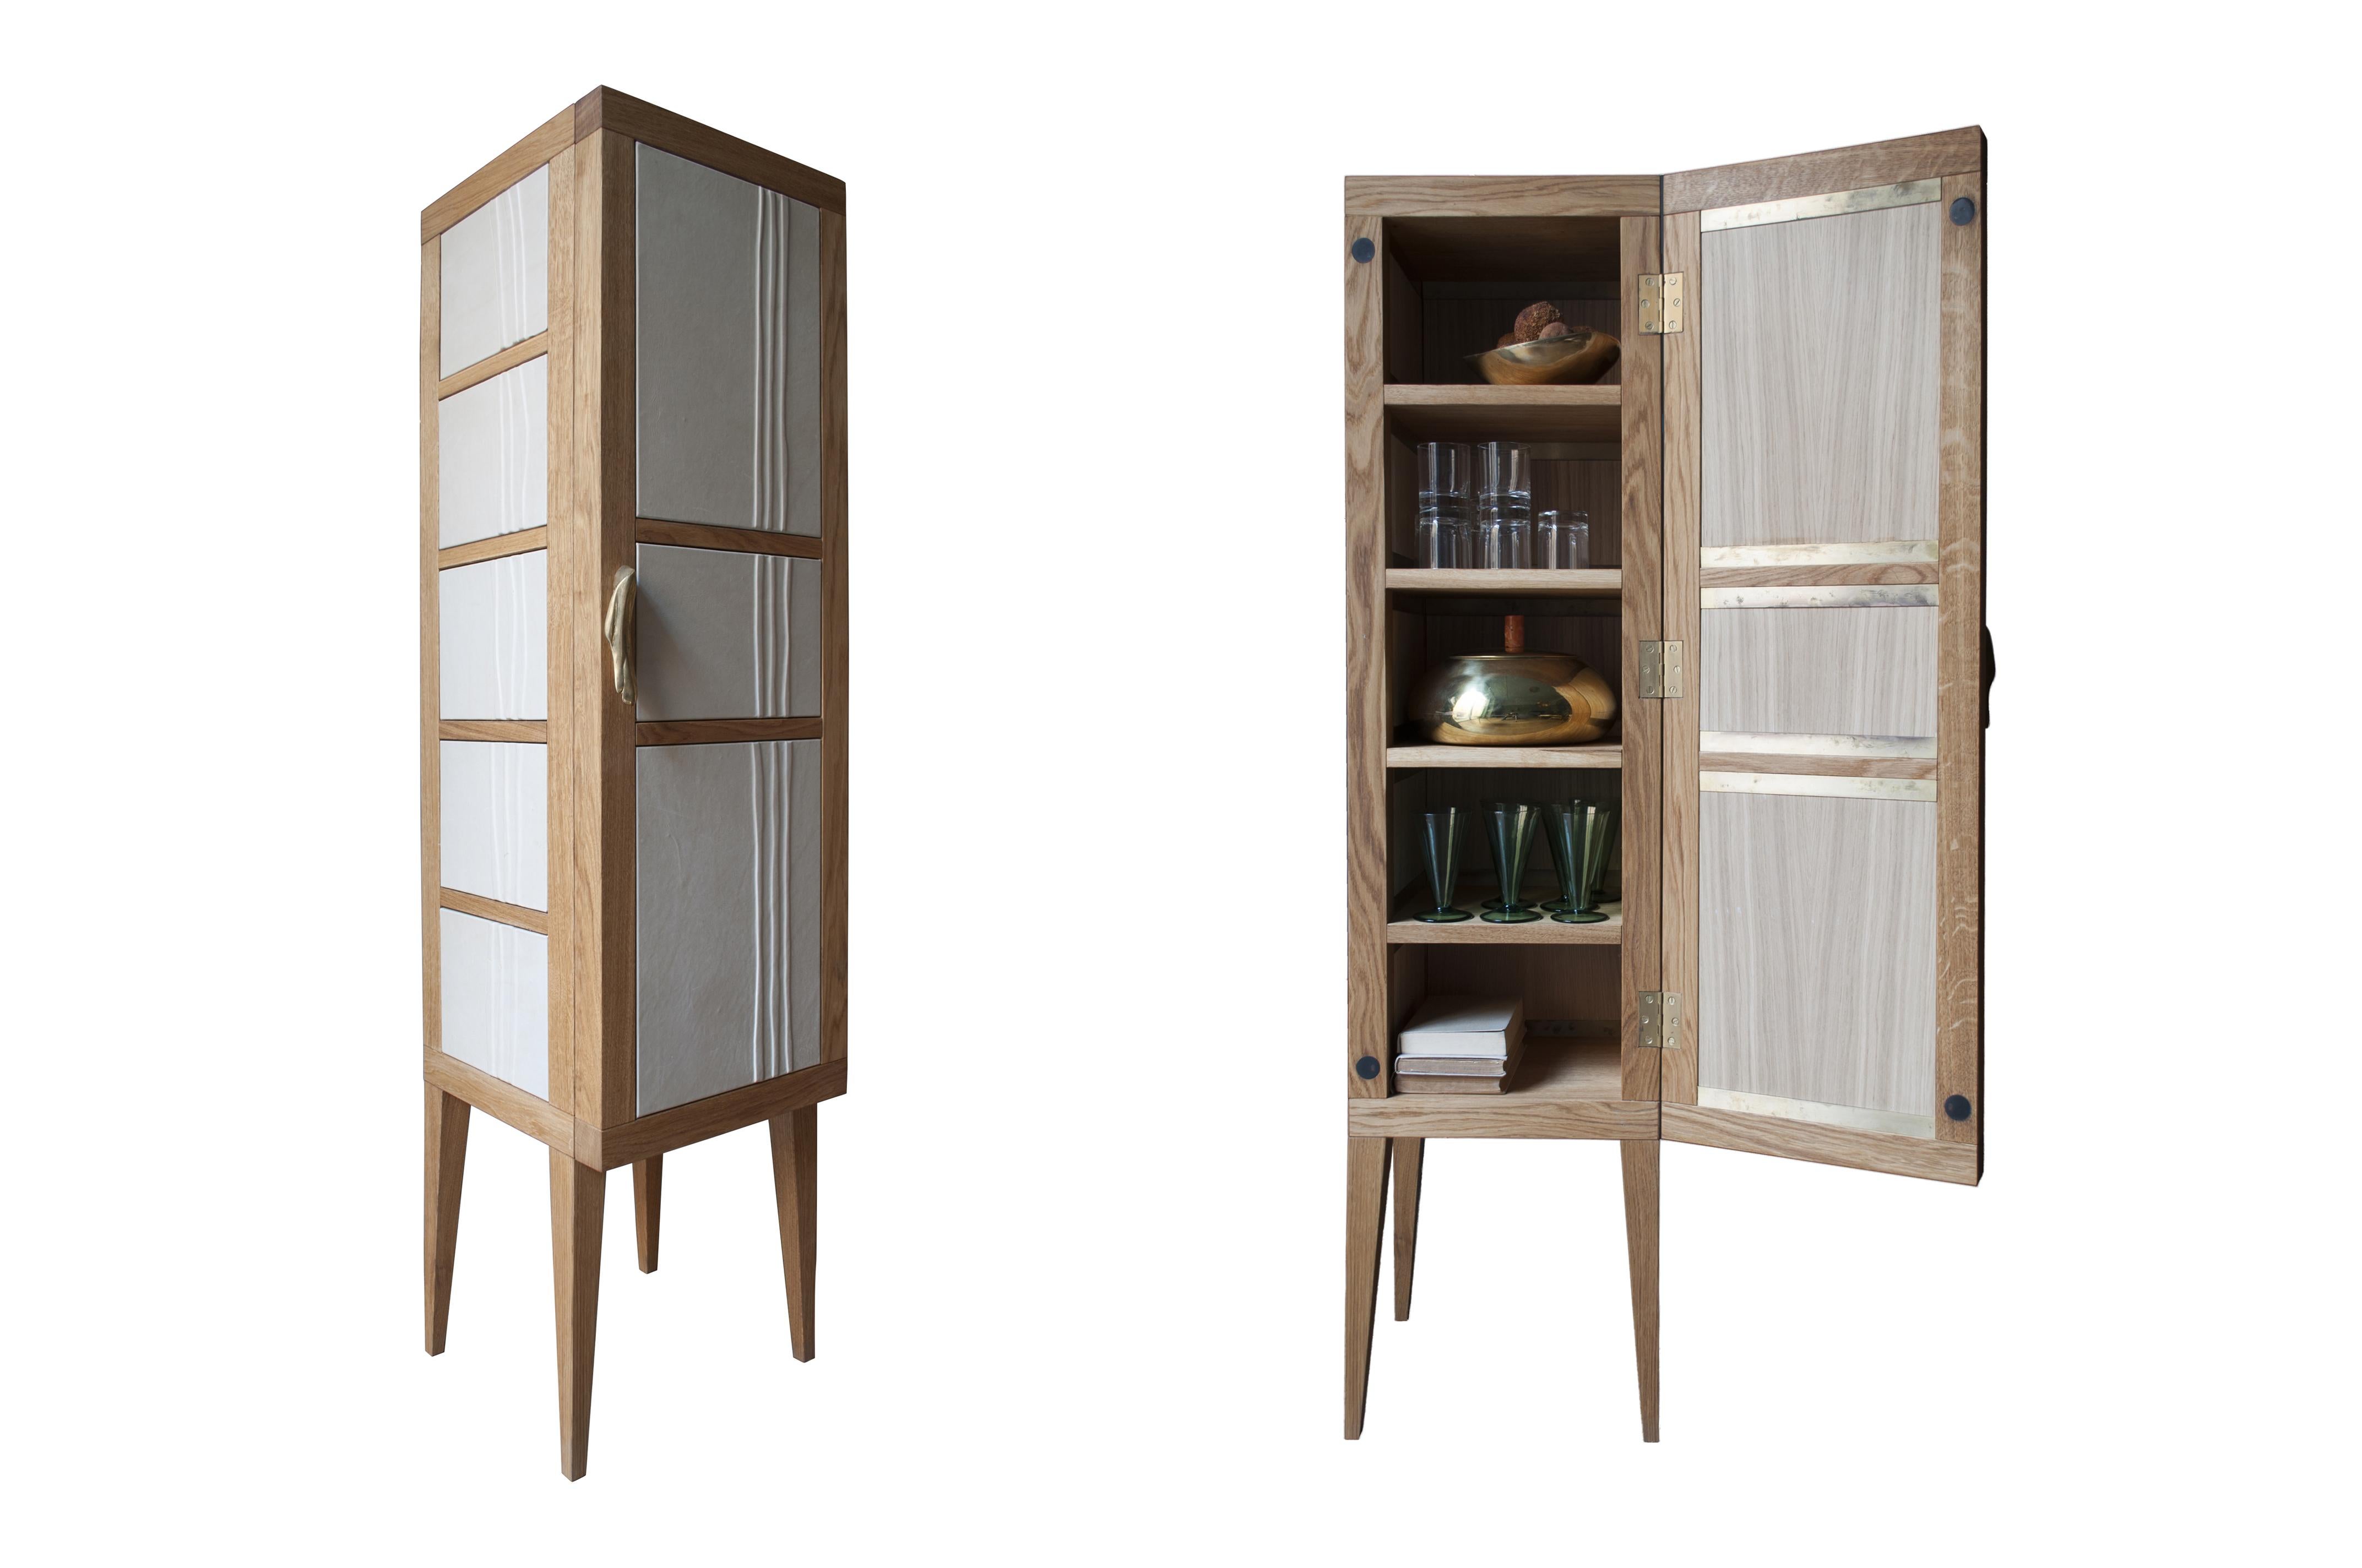 Contemporary, Absolut, Cabinet in Full-Grain Leather Handcrafted in Bas-Relief (Leder) im Angebot